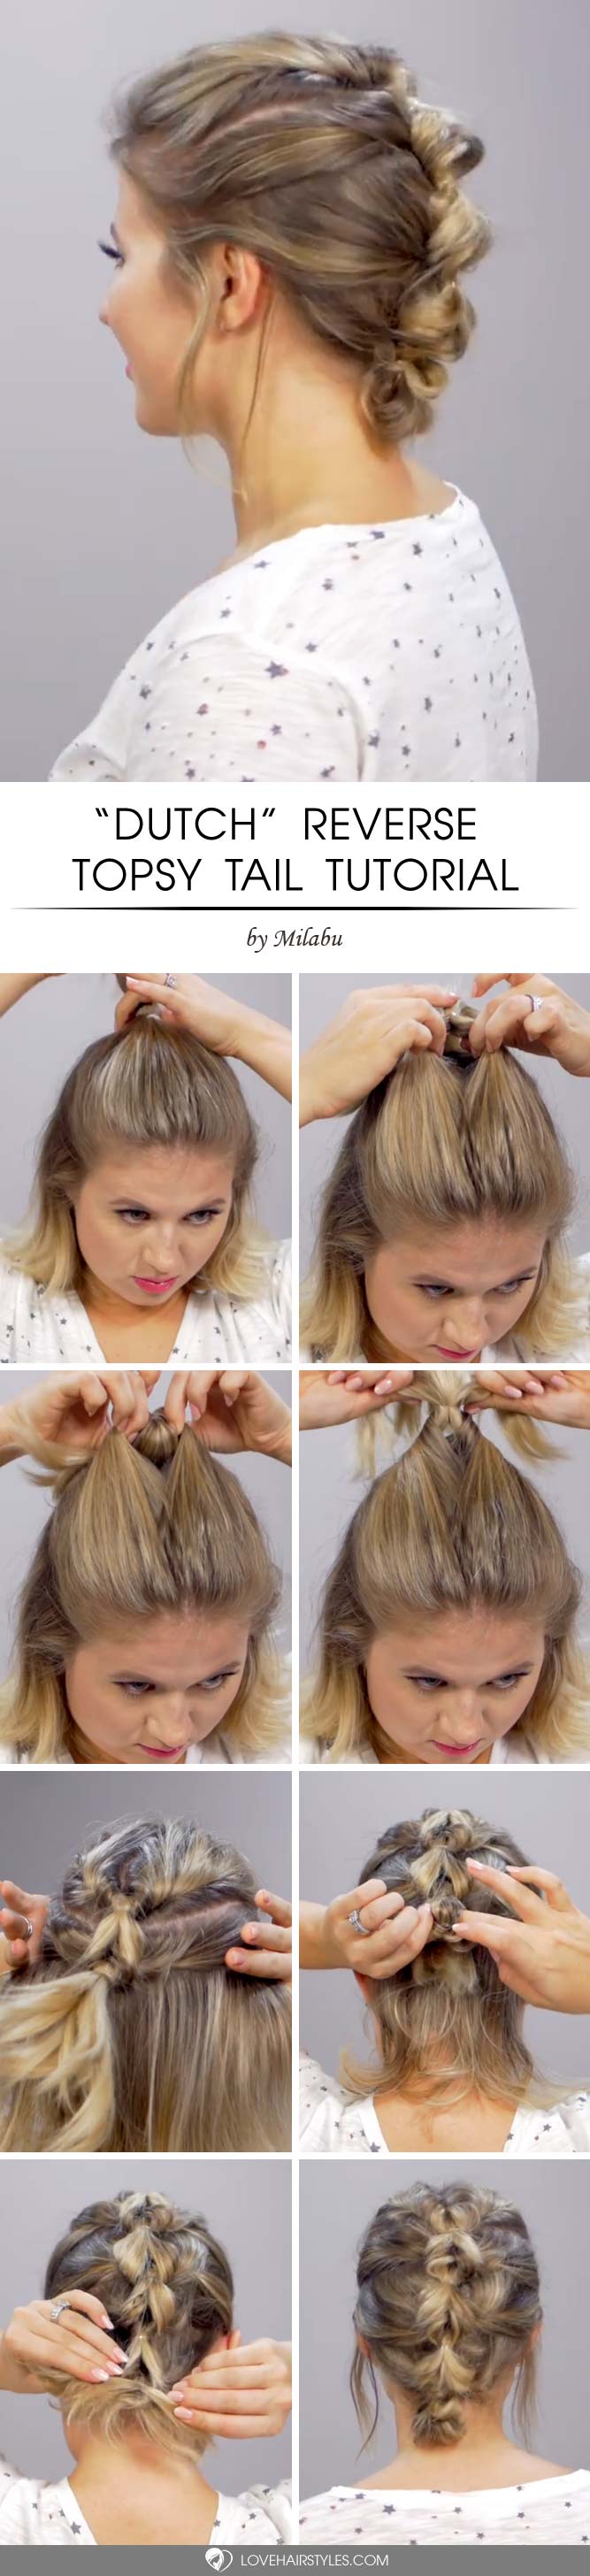 Dutch Reverse Topsy Tail #topsytail #tutorials #hairstyles